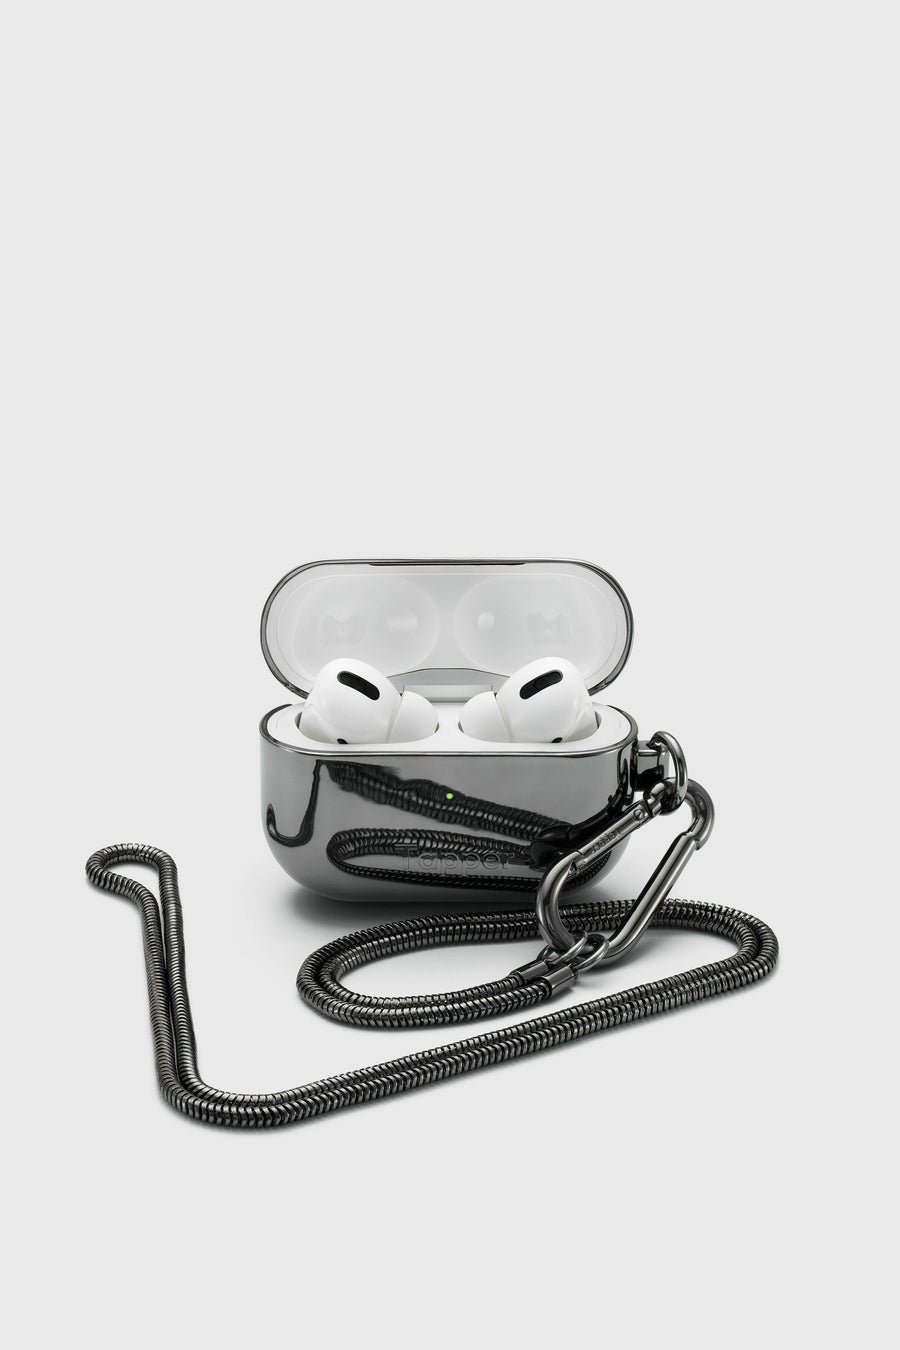 Tapper's real hematite black plated original metal neck case tech jewelry protects and keeps your Apple AirPods Pro close at hand. The luxurious, elevated and accessible neck case plated in precious metals steps up your AirPods Pro jewellery game. Worried about losing your AirPods? Detachable snake chain and carabiner for convenient and hassle-free safekeeping around your neck. The next must-have accessory crafted for ultimate luxury. Compatible with AirPods Pro. Designed in Sweden. Free Express Shipping.